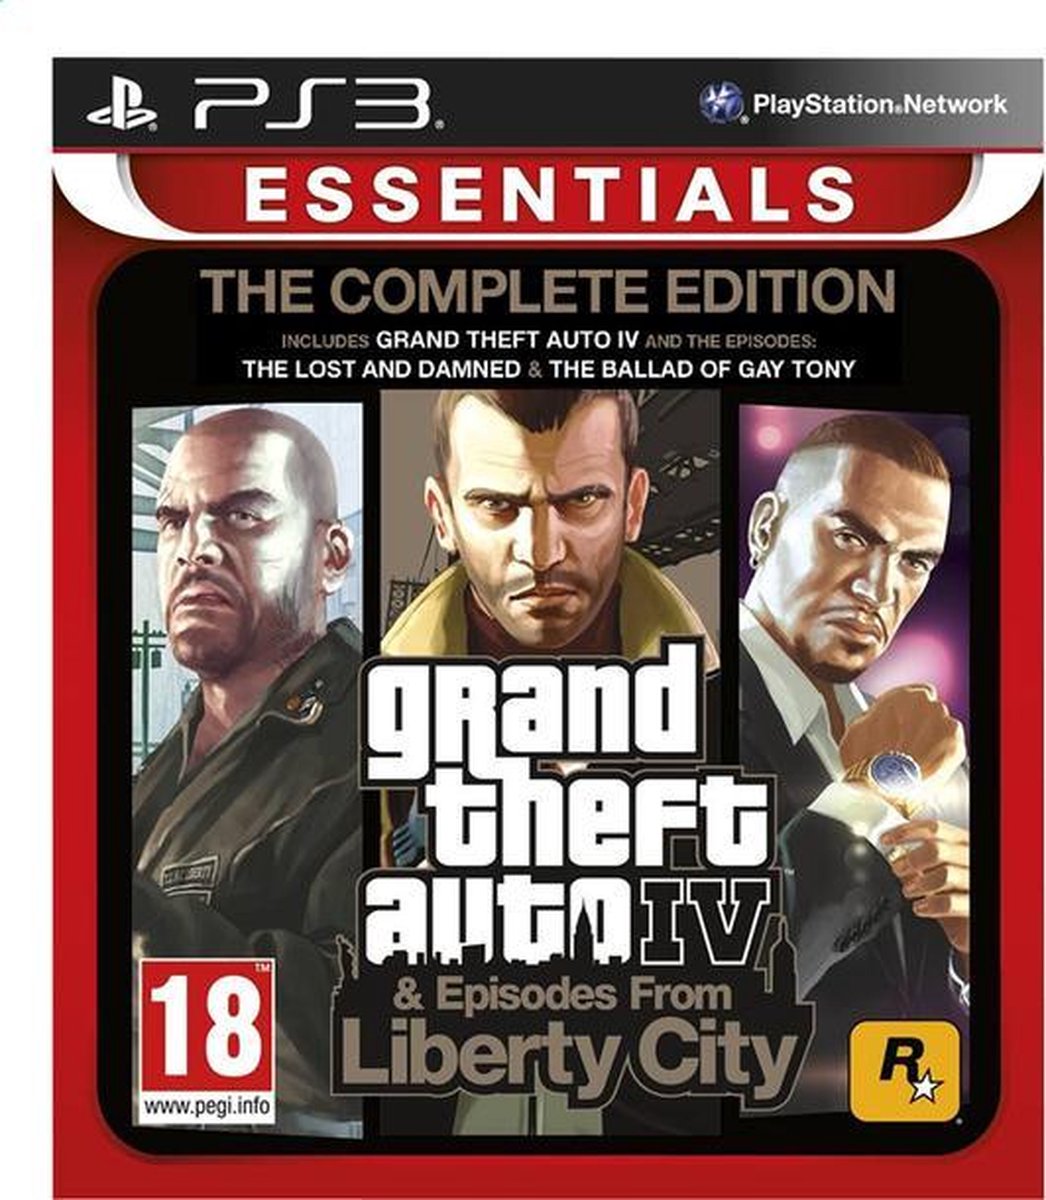 Geneeskunde Overtreden Andrew Halliday Grand Theft Auto IV (GTA IV) - Complete Edition - PS3 | Games | bol.com